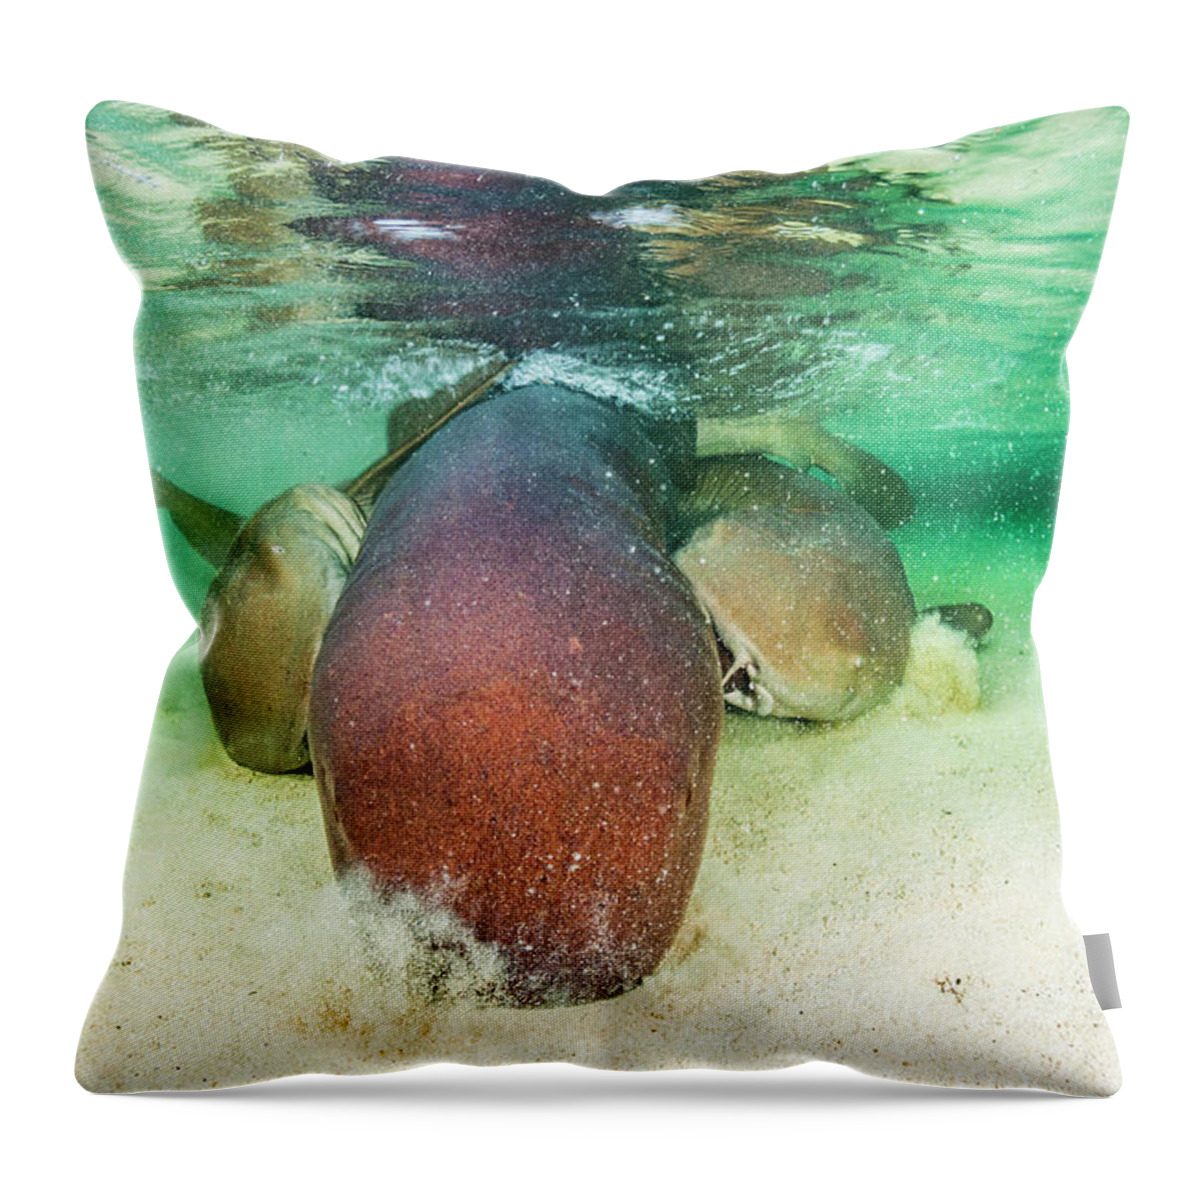 Animal Throw Pillow featuring the photograph Nurse Shark Two Males Bite Onto The Pectoral Fins Of A by Shane Gross / Naturepl.com